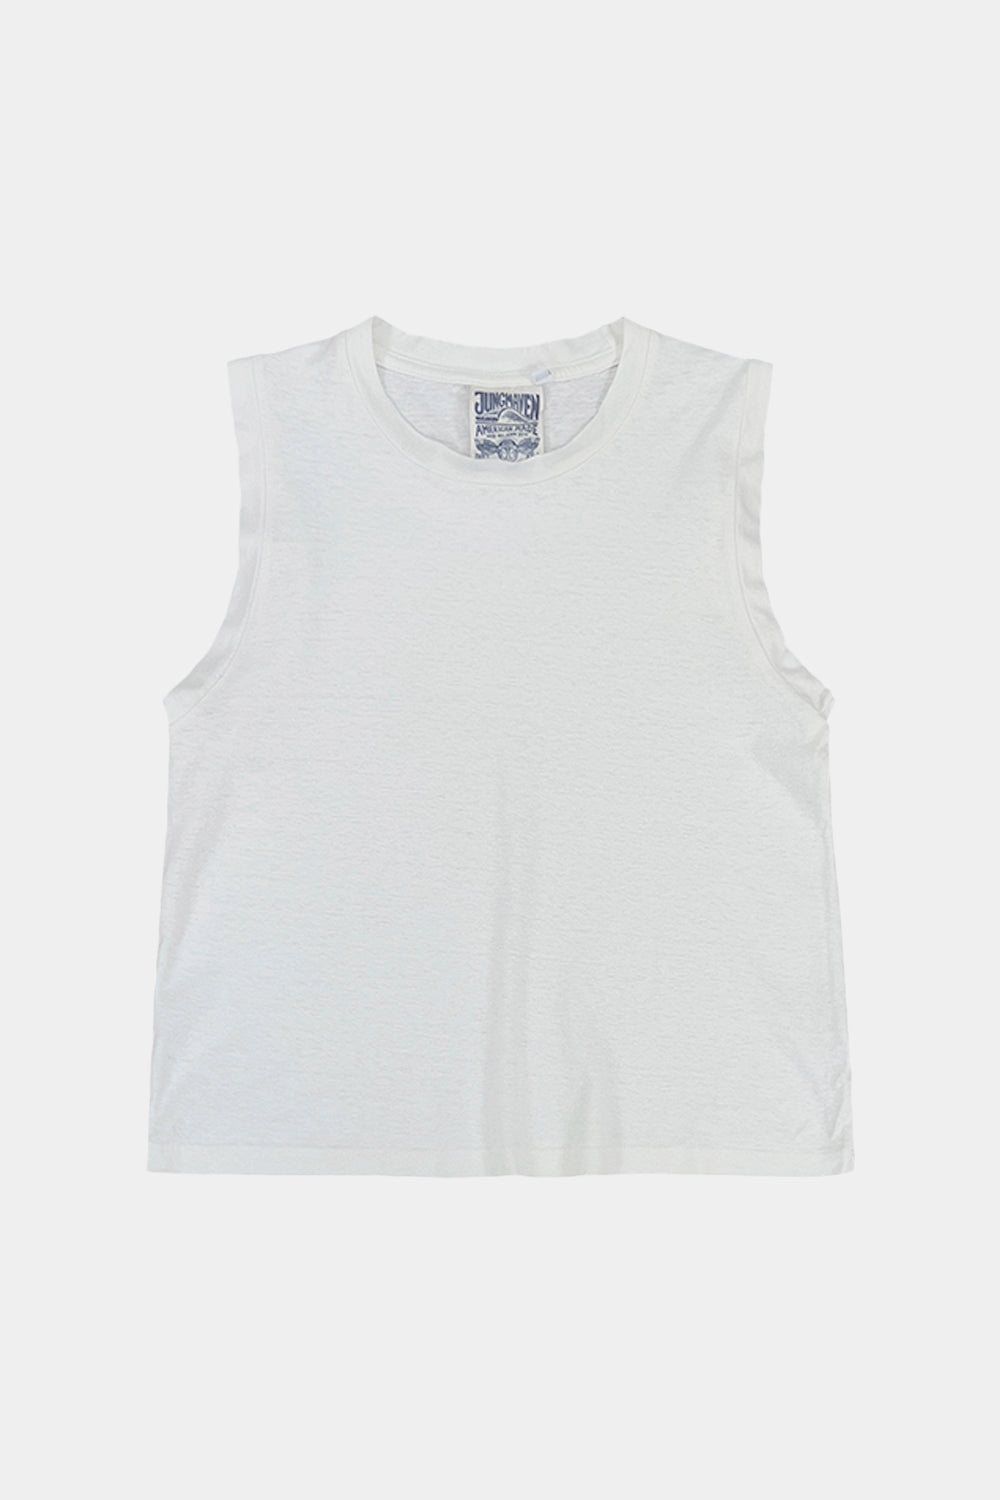 Phoenix Muscle Tee | Jungmaven Hemp Clothing & Accessories / Color: Washed White